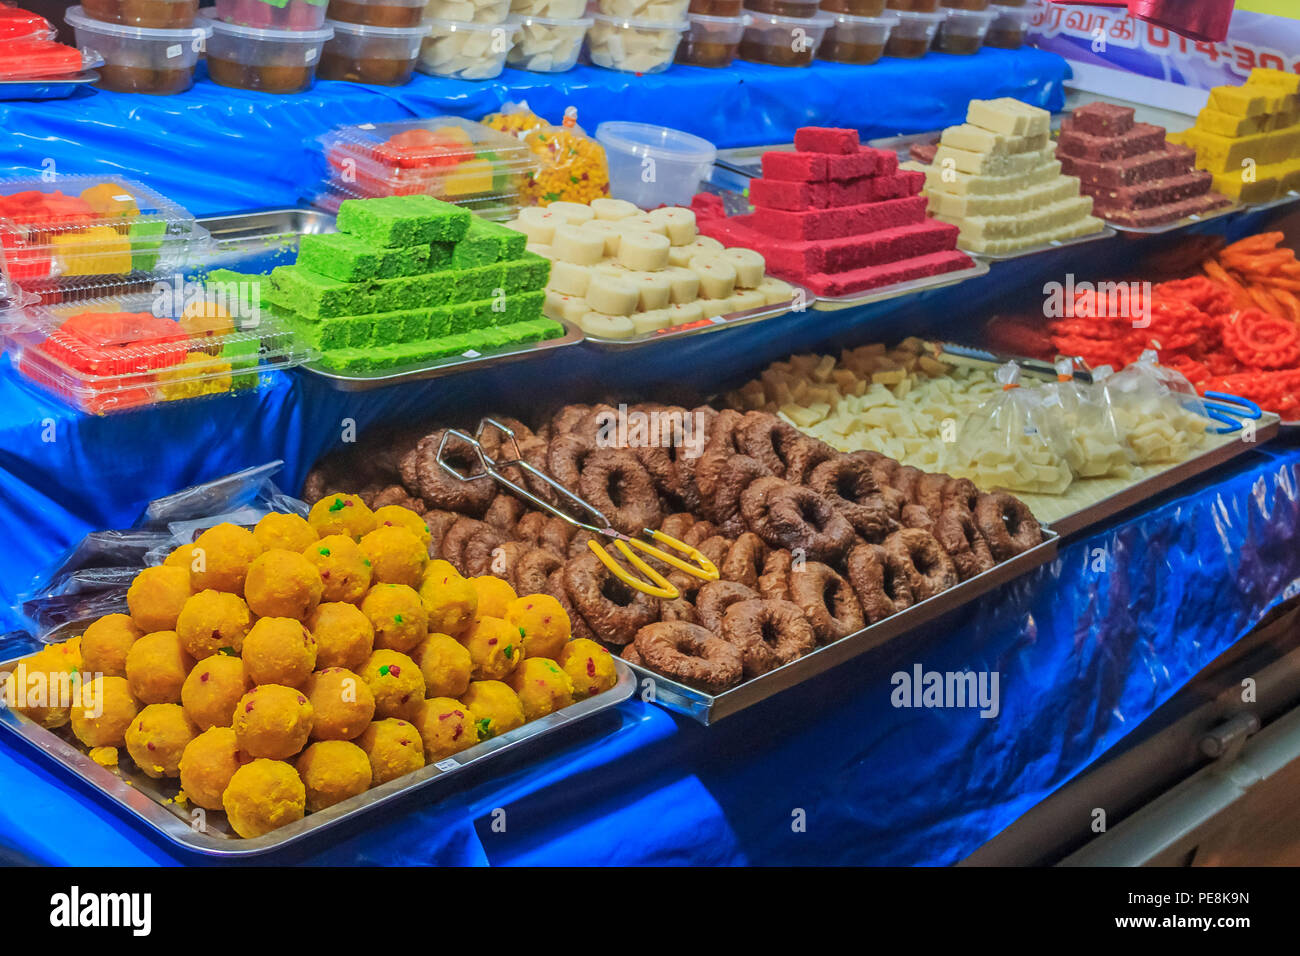 Georgetown, Penang, Malaysia - August 17, 2013: Street food vendor or hawker stall in Penang Georgetown UNESCO heritage zone, selling sweets Stock Photo